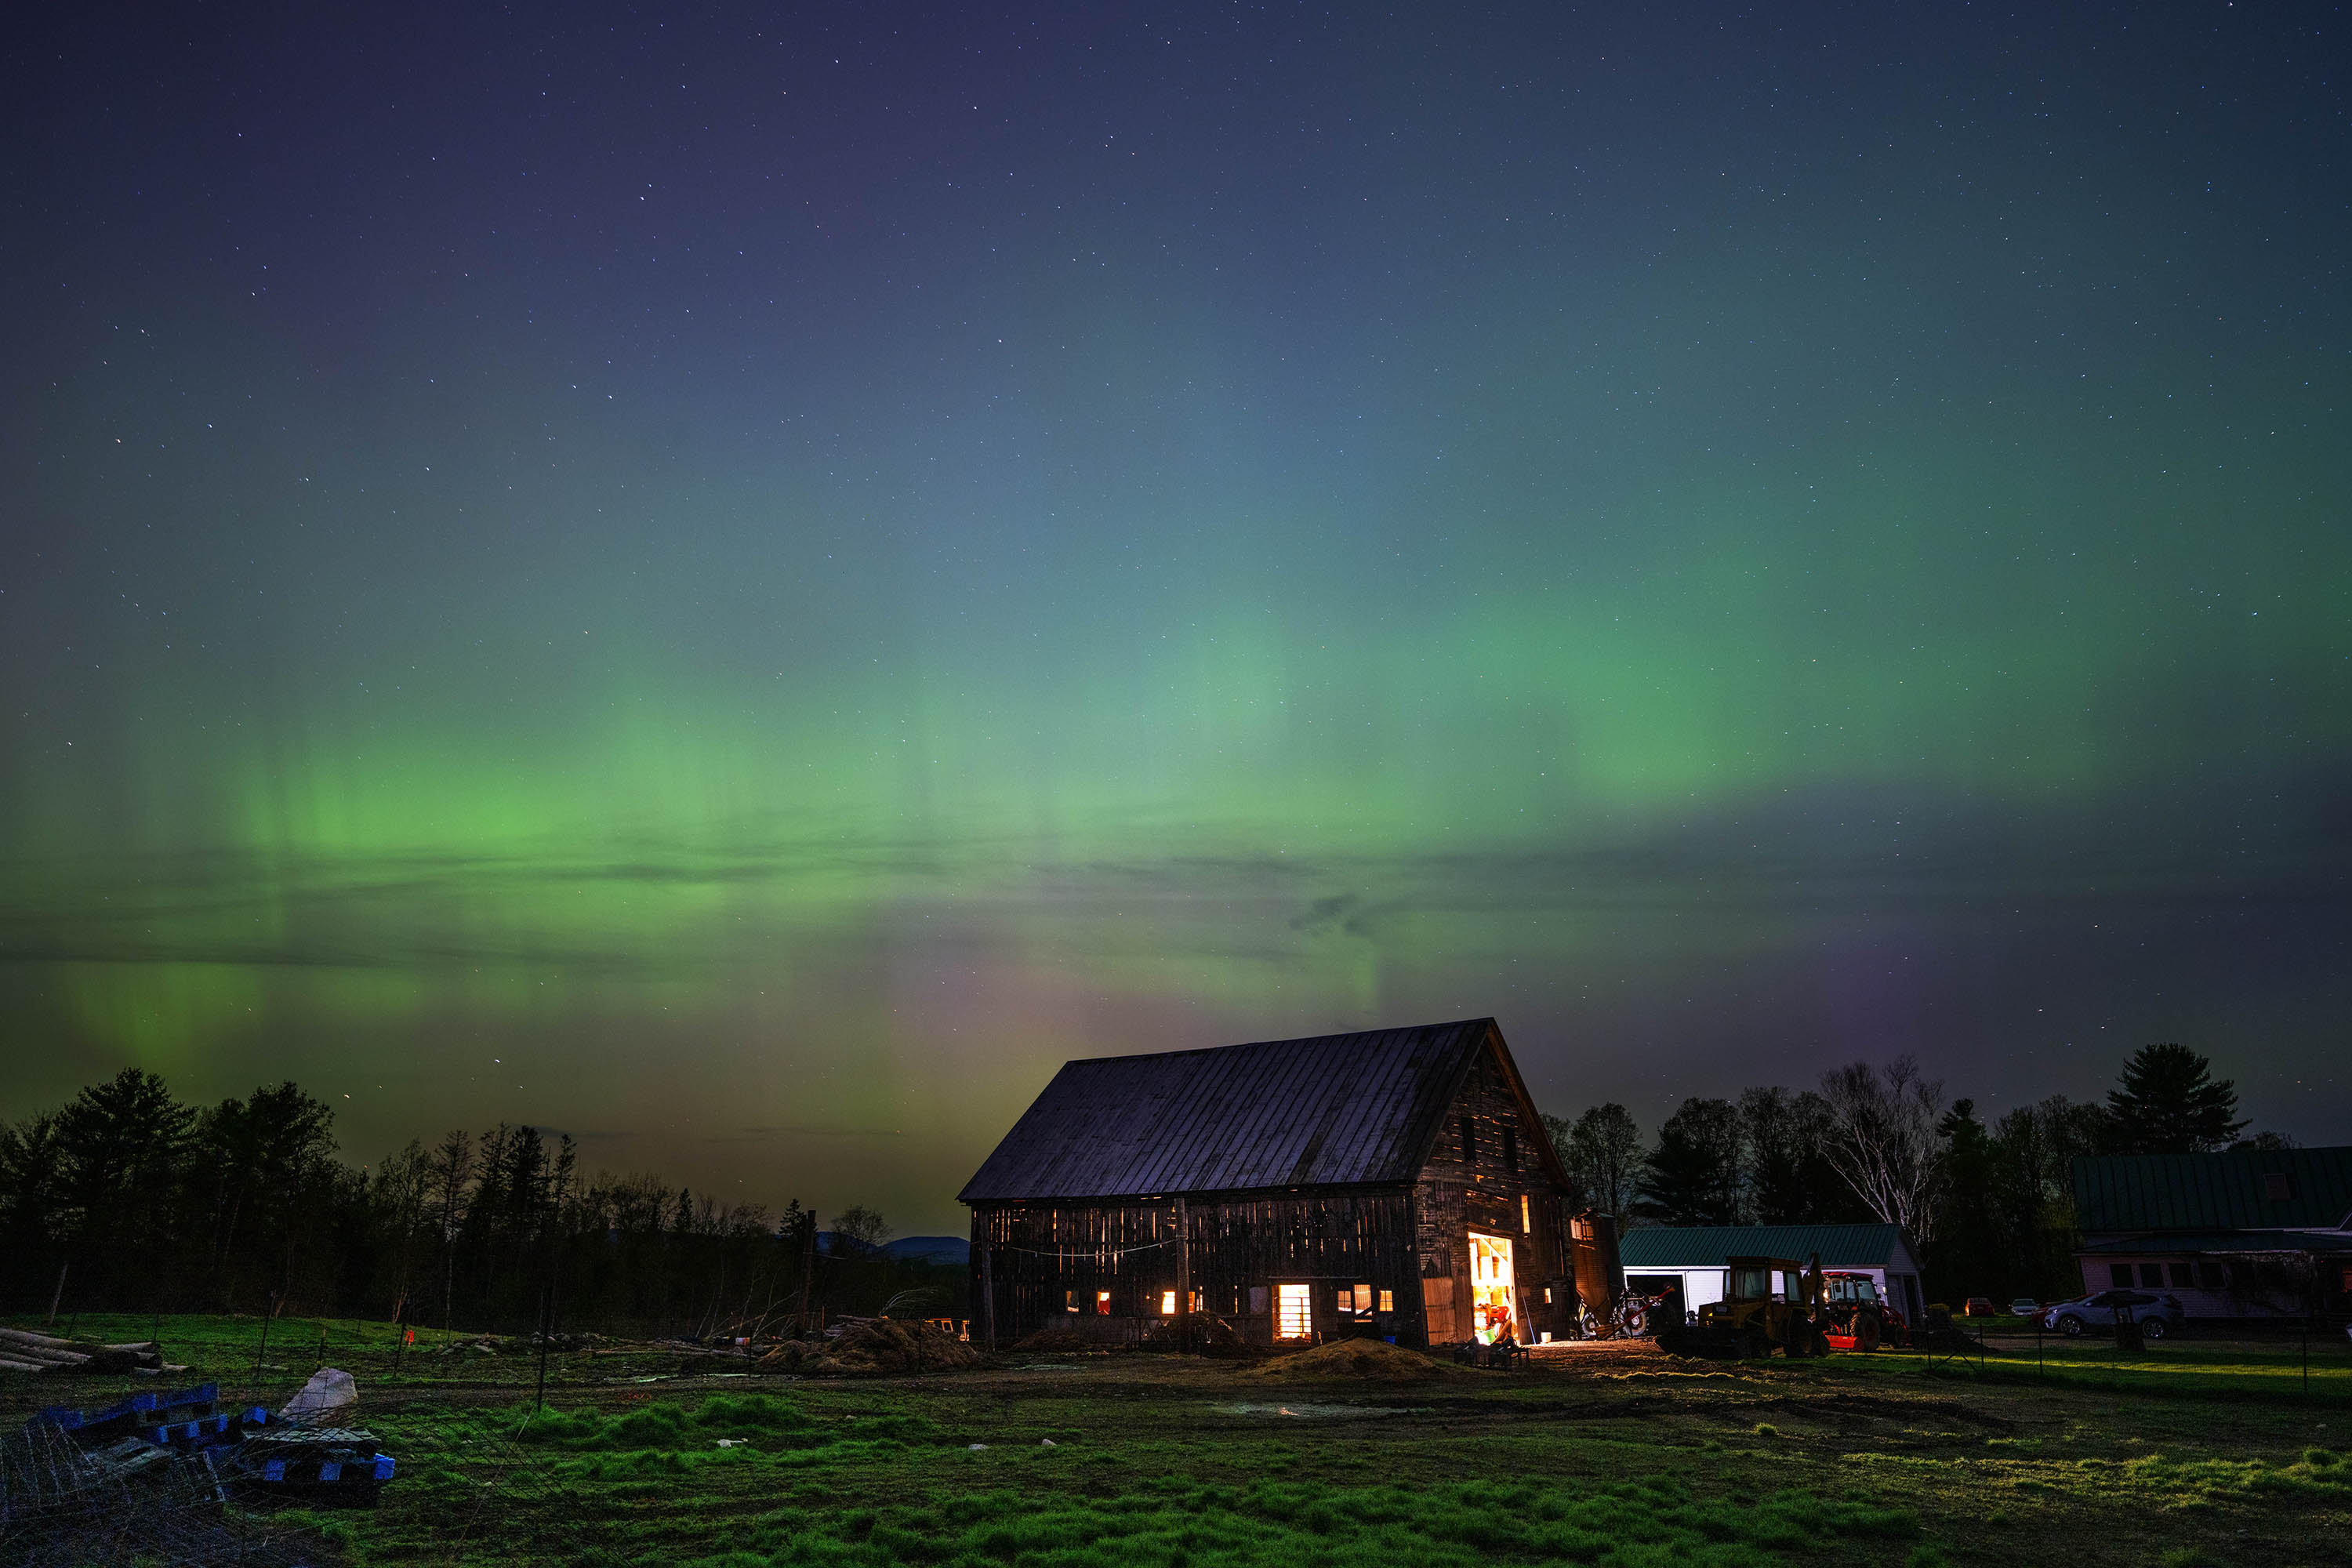 The northern lights fill the sky with green ribbons over a barn in Mercer, Maine.